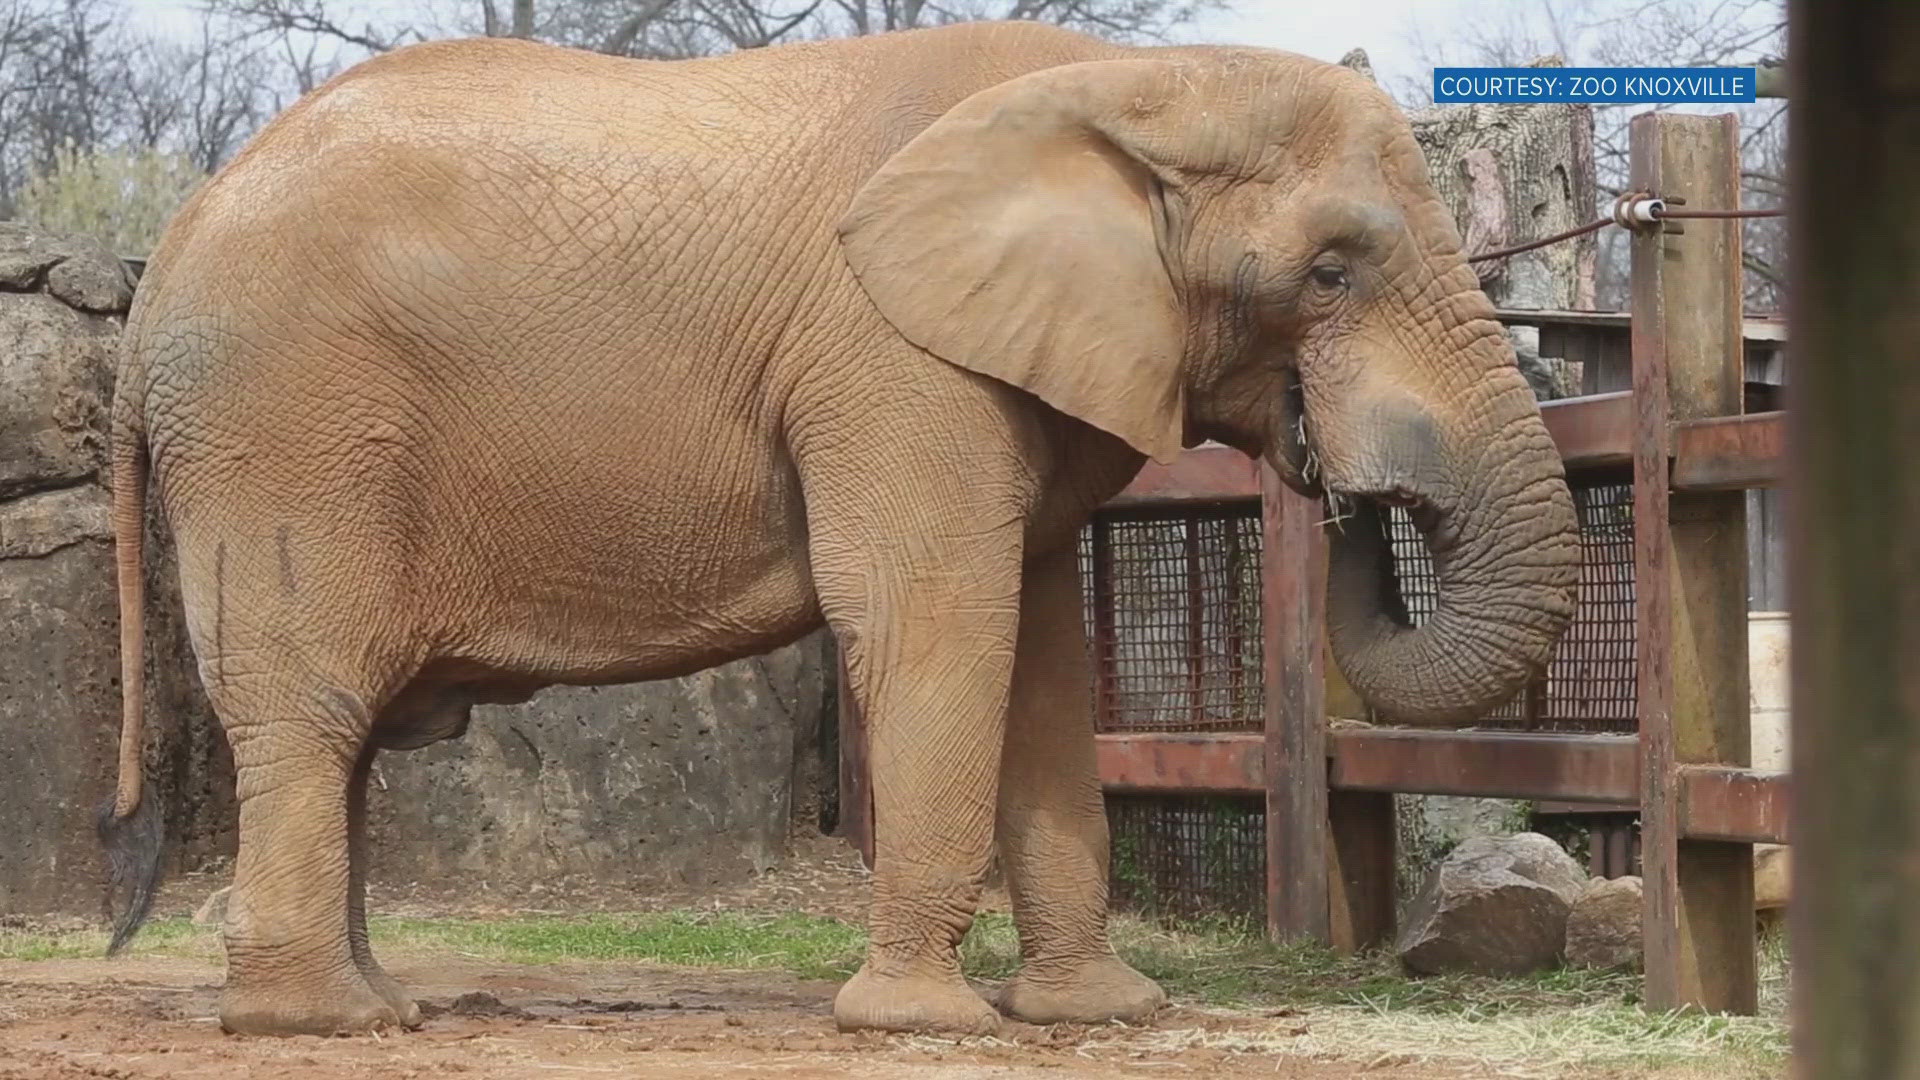 The zoo was initially preparing Tonka to be transported to an Elephant Sanctuary in Middle Tennessee. The zoo said they will officer hospice care for the 46-year-old